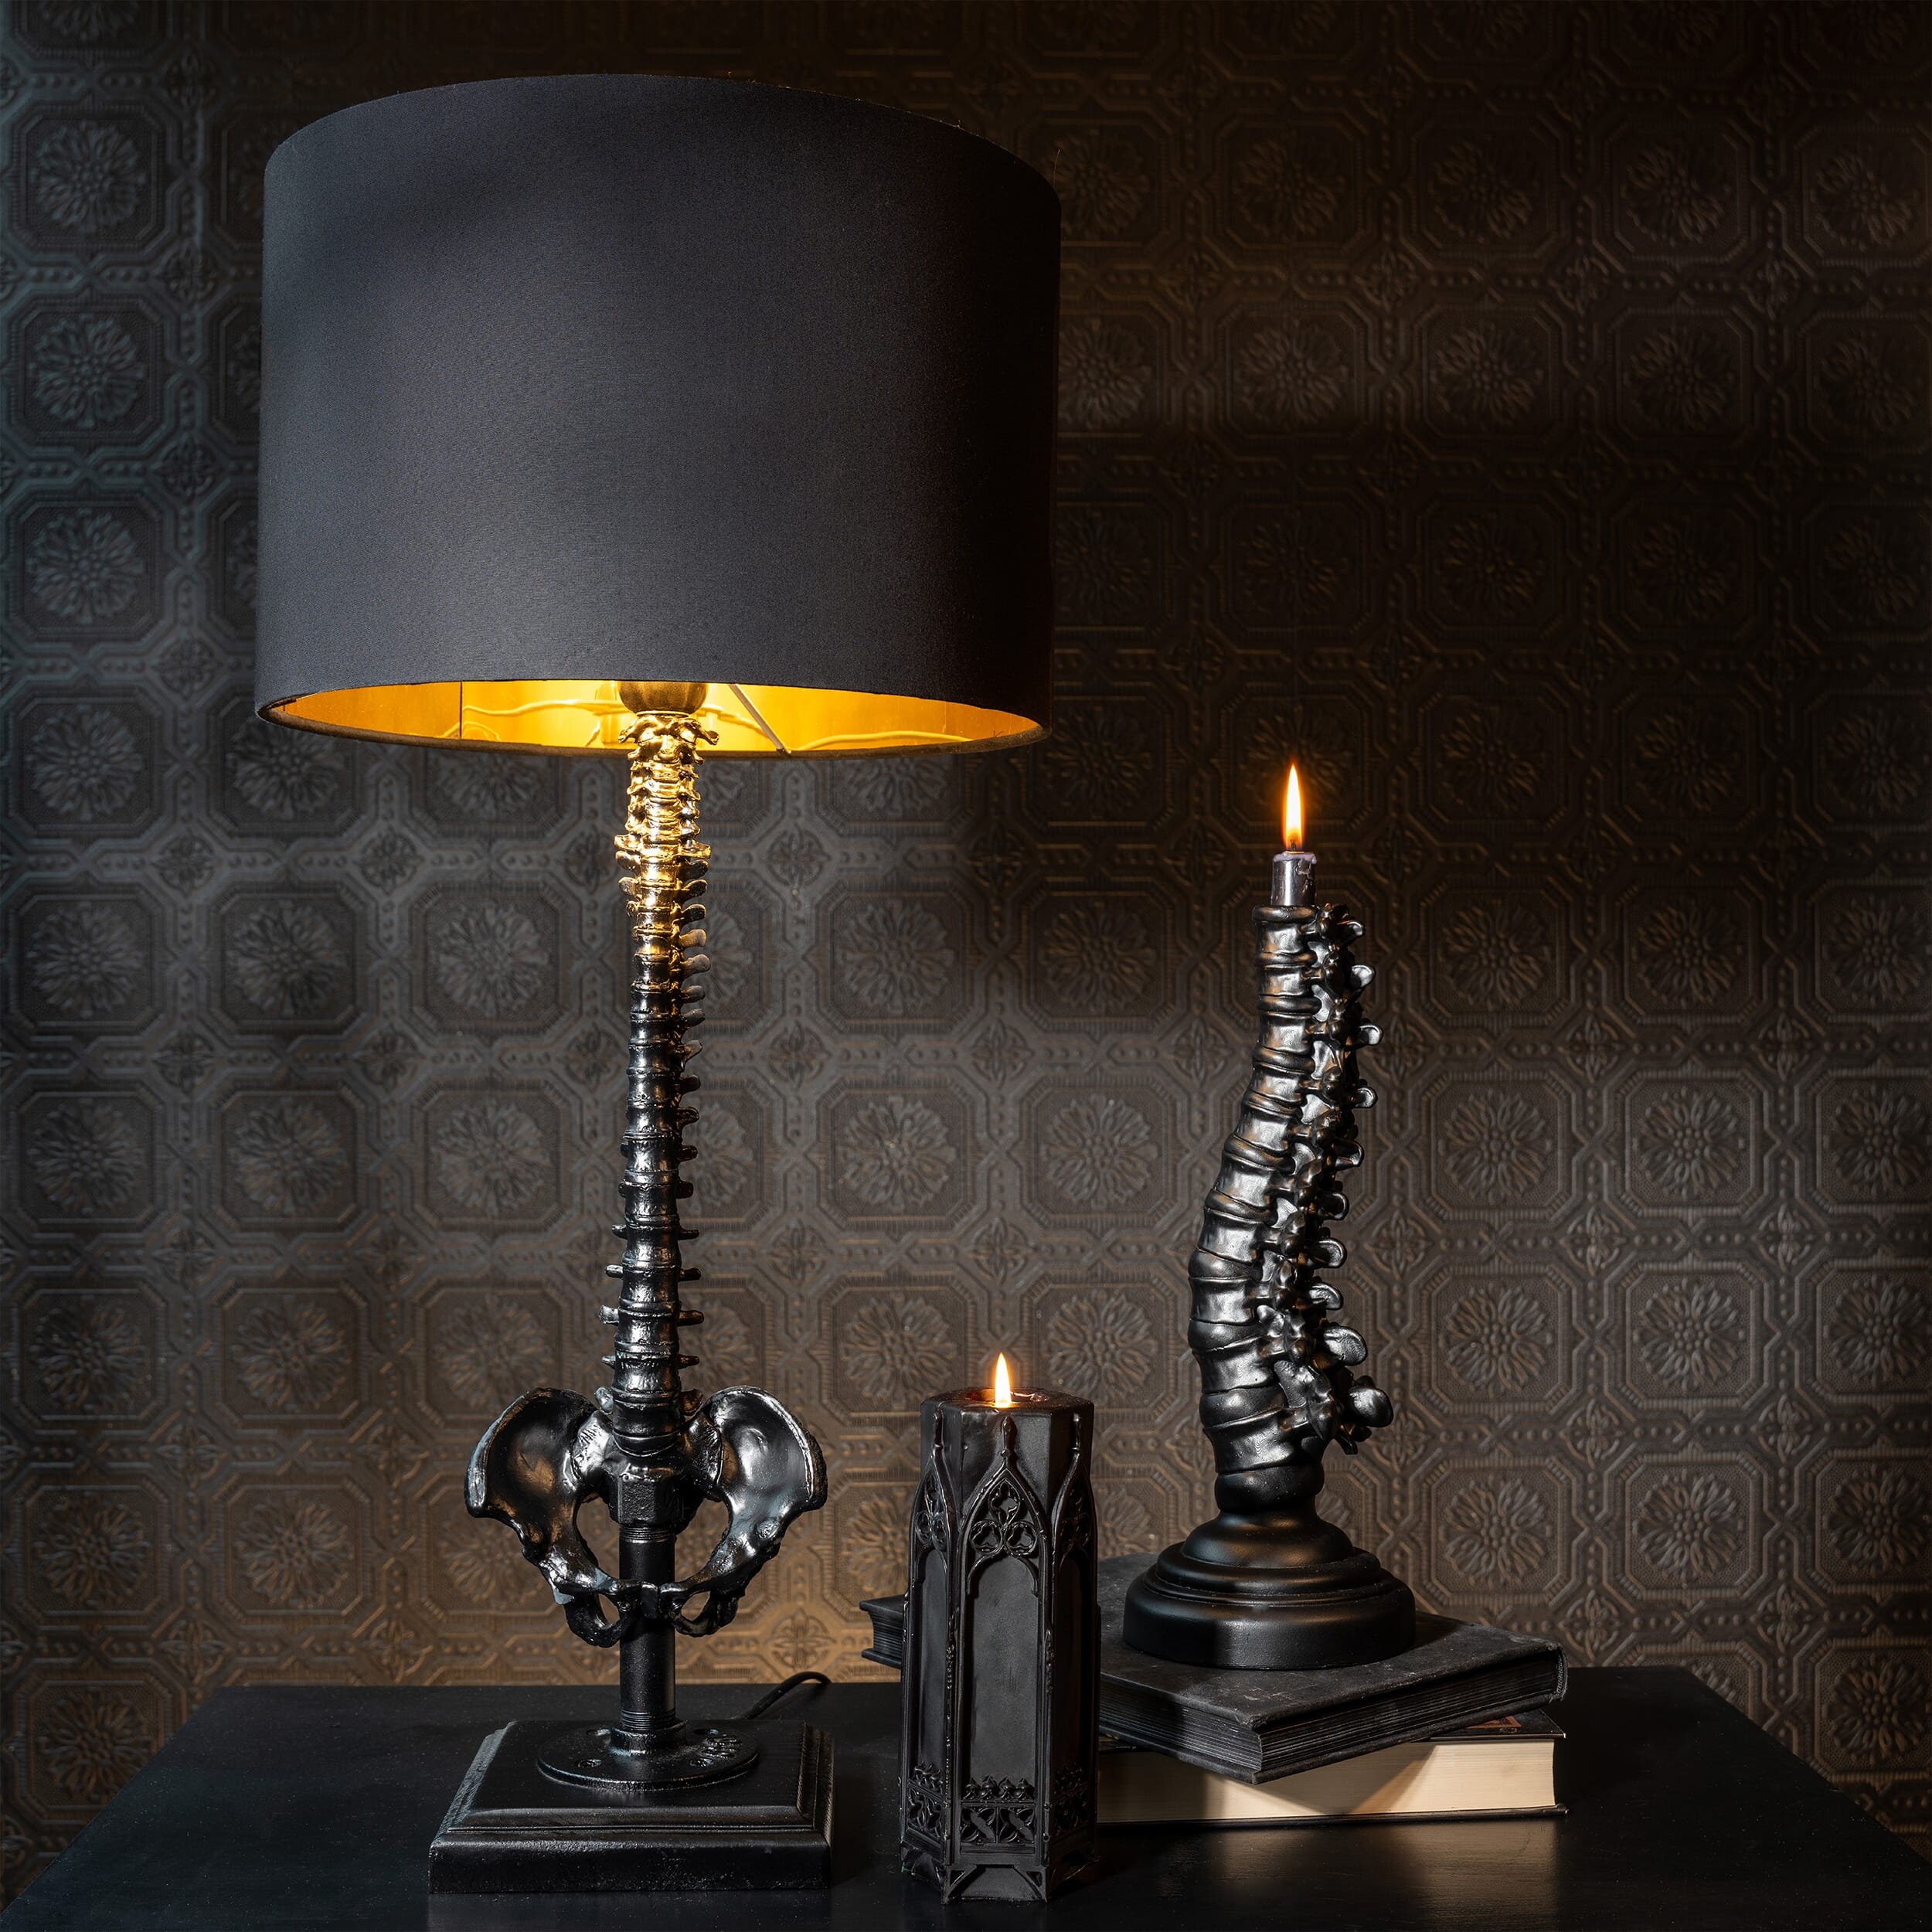 The Spine Lamp Handmade Gothic Home Decor by the Blackened Teeth Gothic  Homeware Lamp 